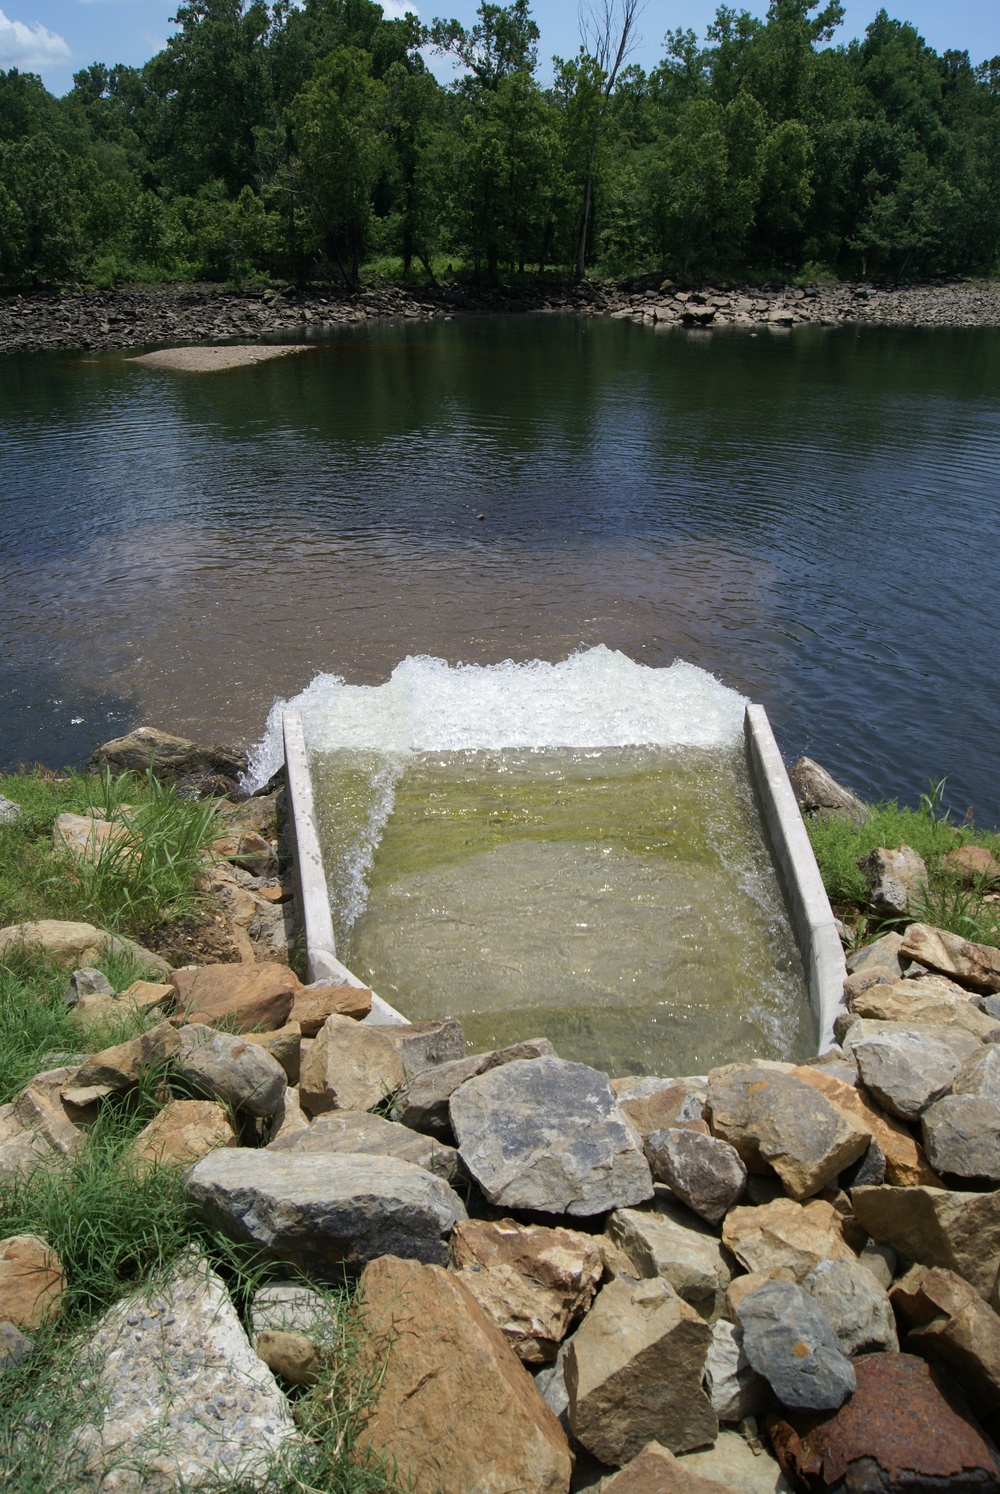 New mechanical systems to help trout fishery below Tenkiller Dam